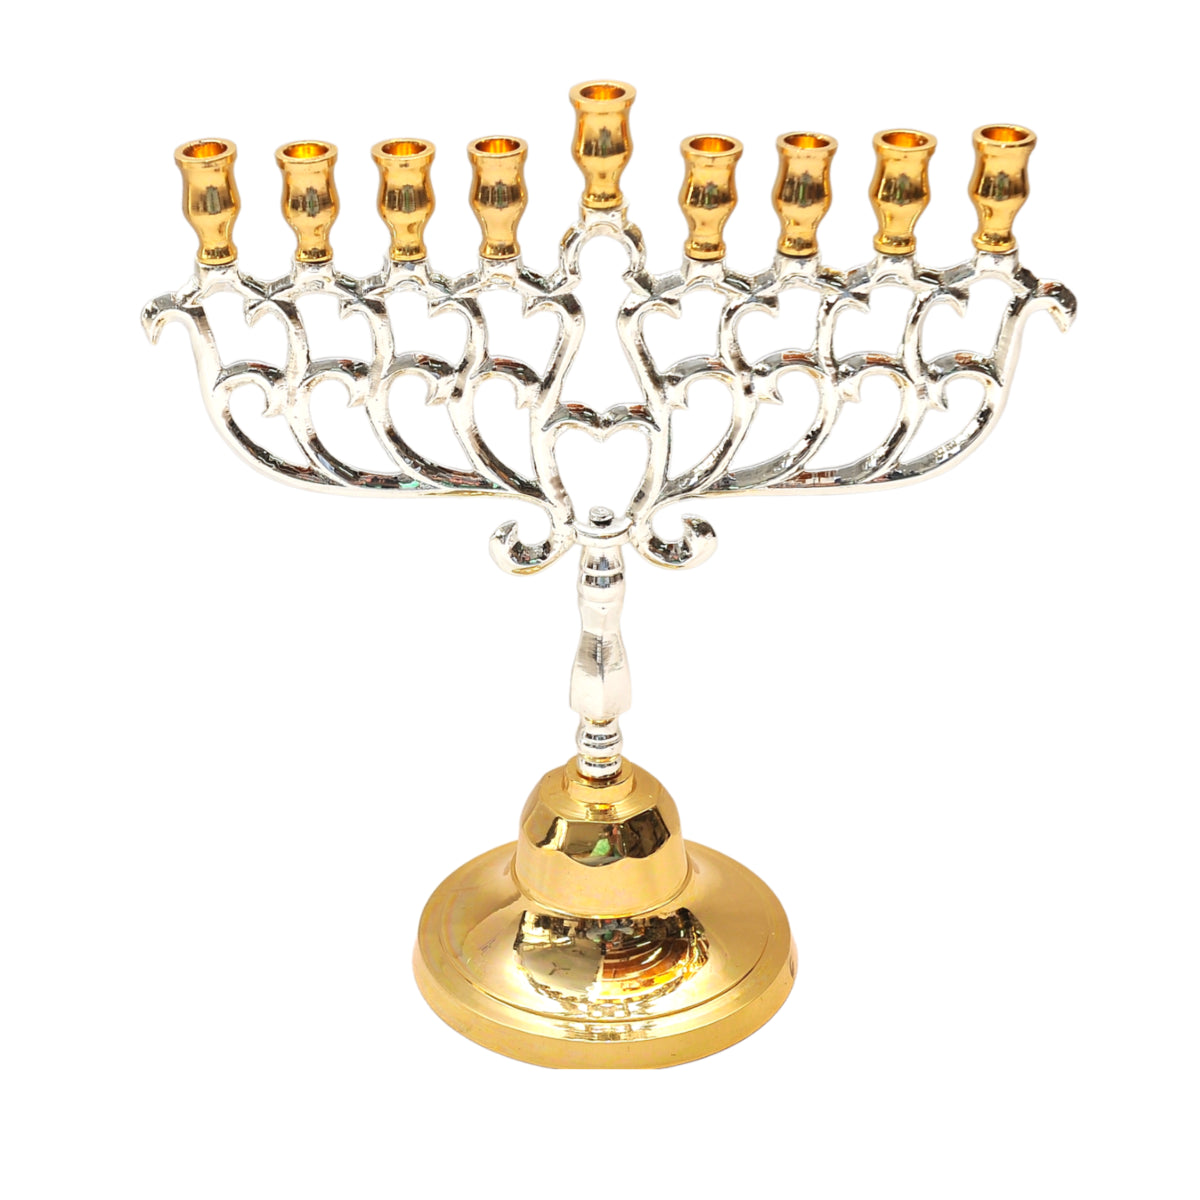 Temple Menorah Gold & Silver Plated Candle Holder Judaica Jerusalem 9.84 / 8.66 inch